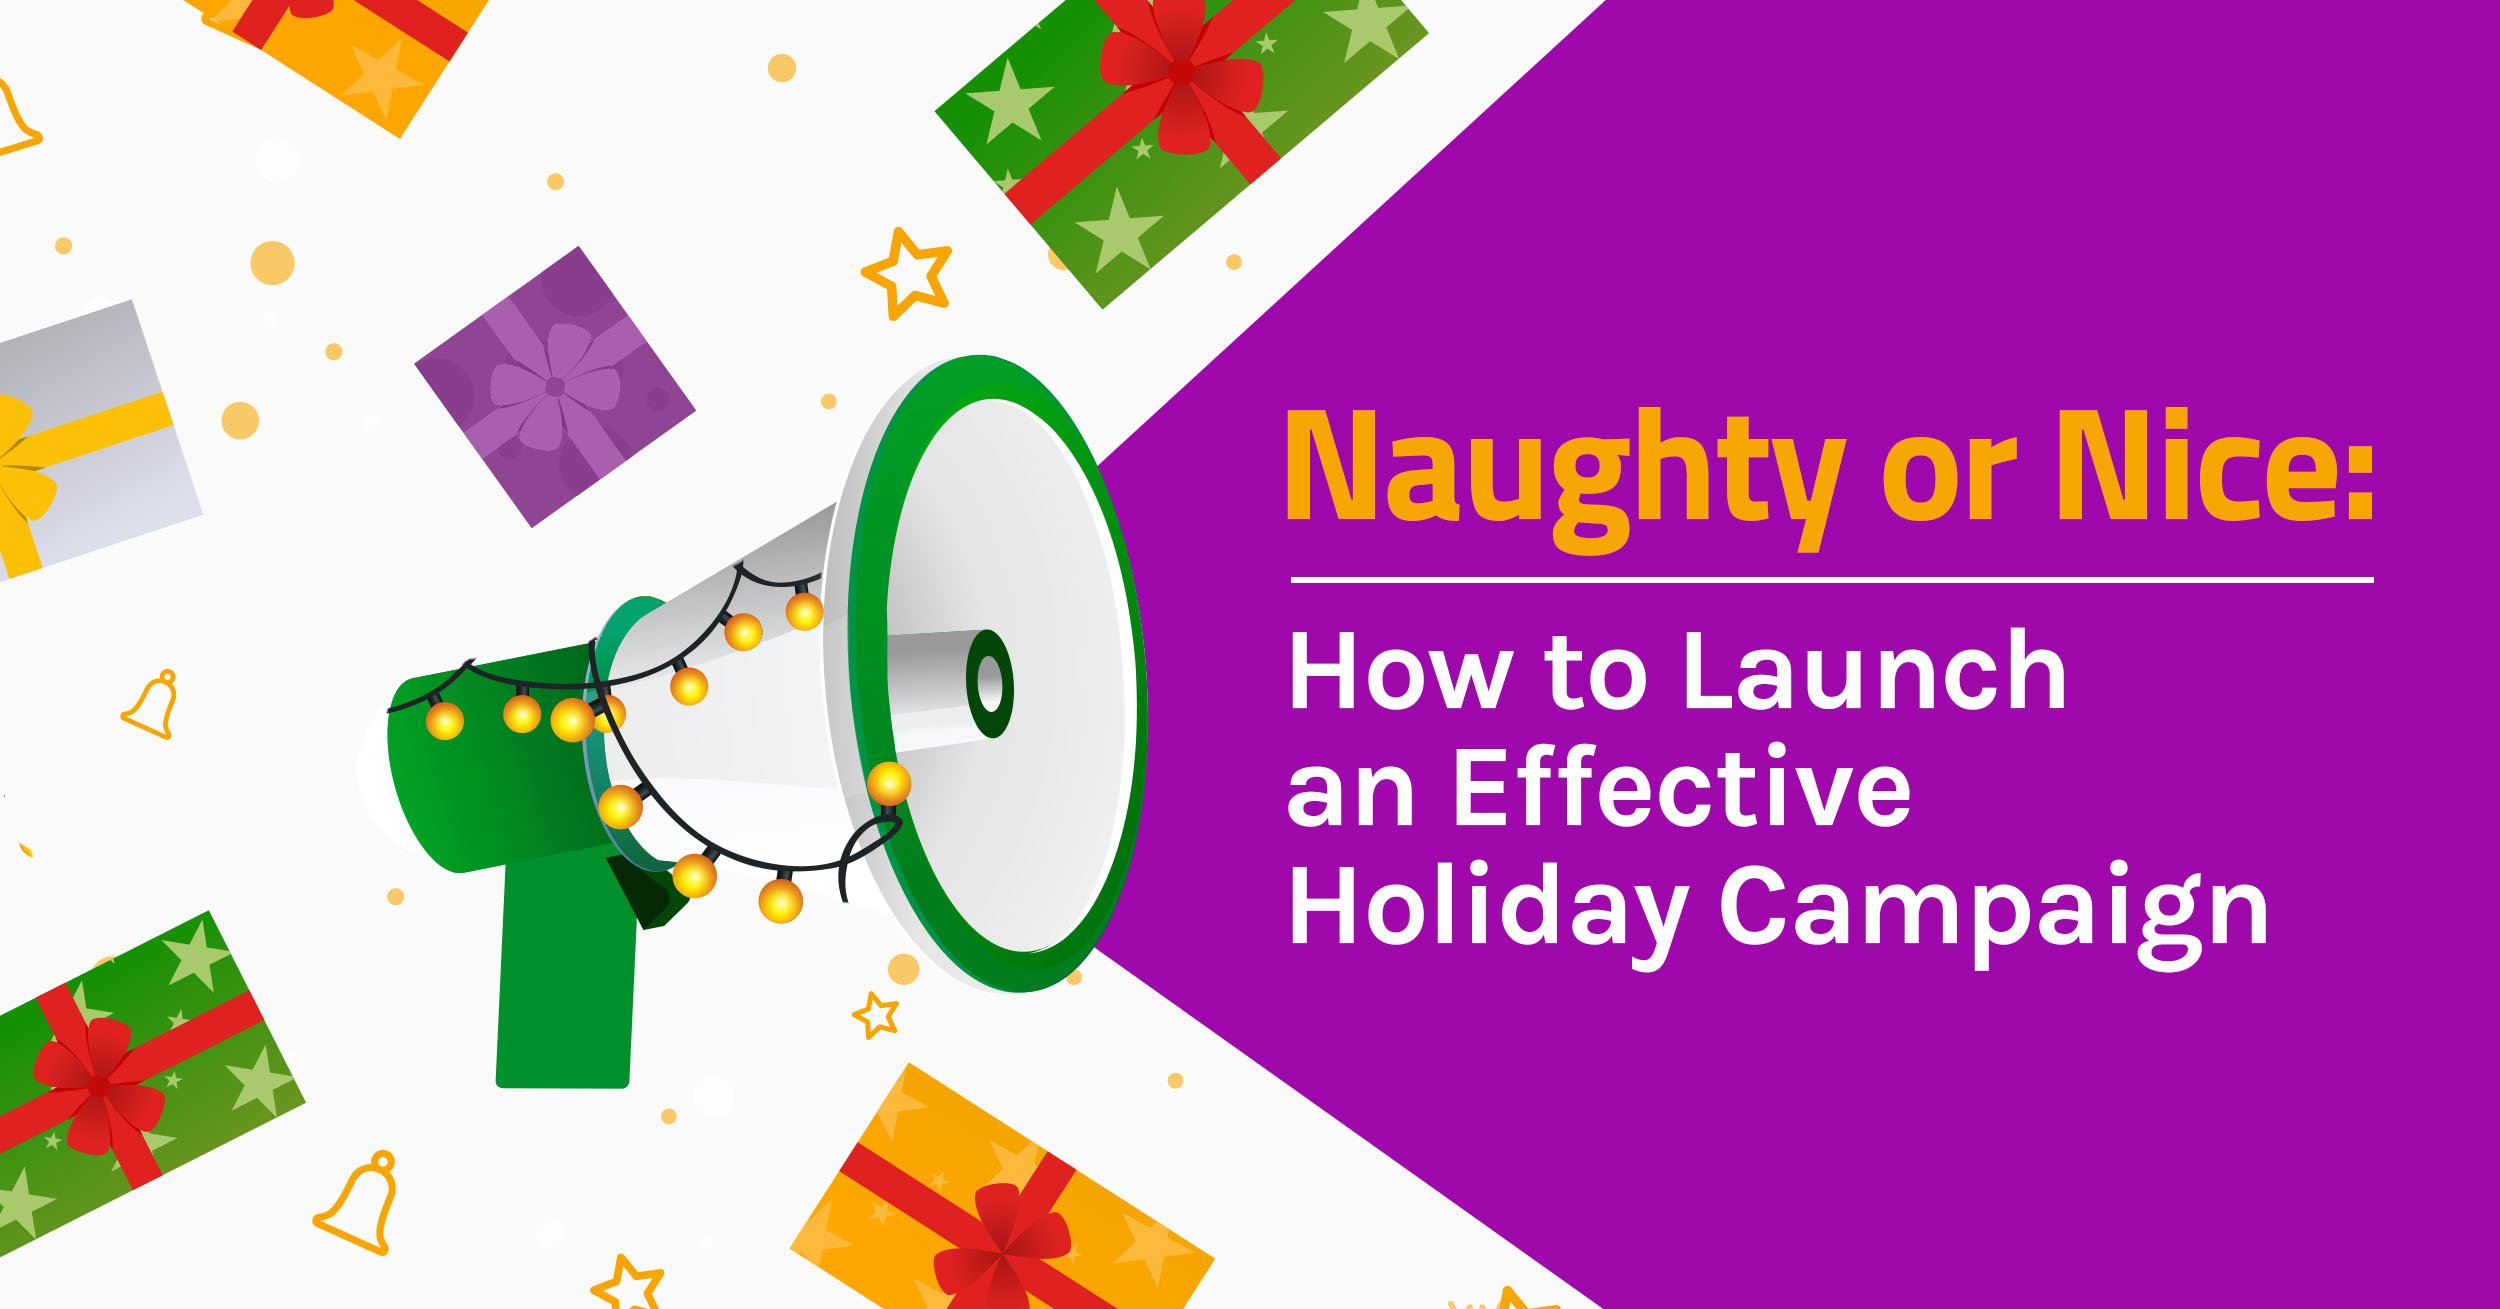 Naughty or Nice: How to Launch an Effective Holiday Campaign